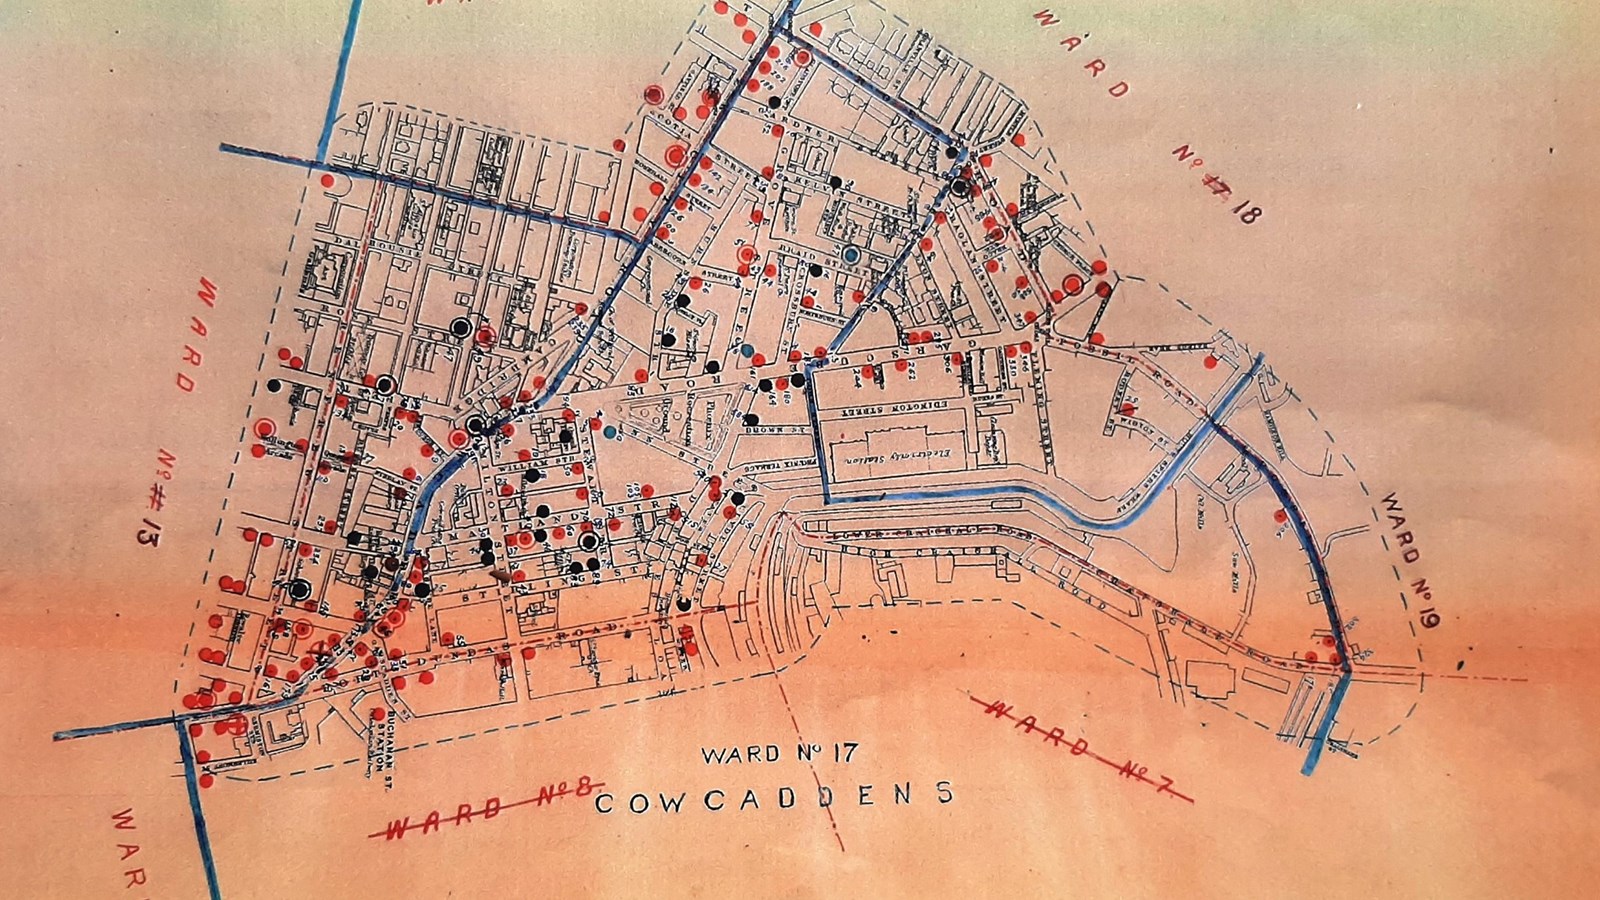 A map of pubs in Glasgow printed on an orange piece of paper and pub markers in red, black and blue.